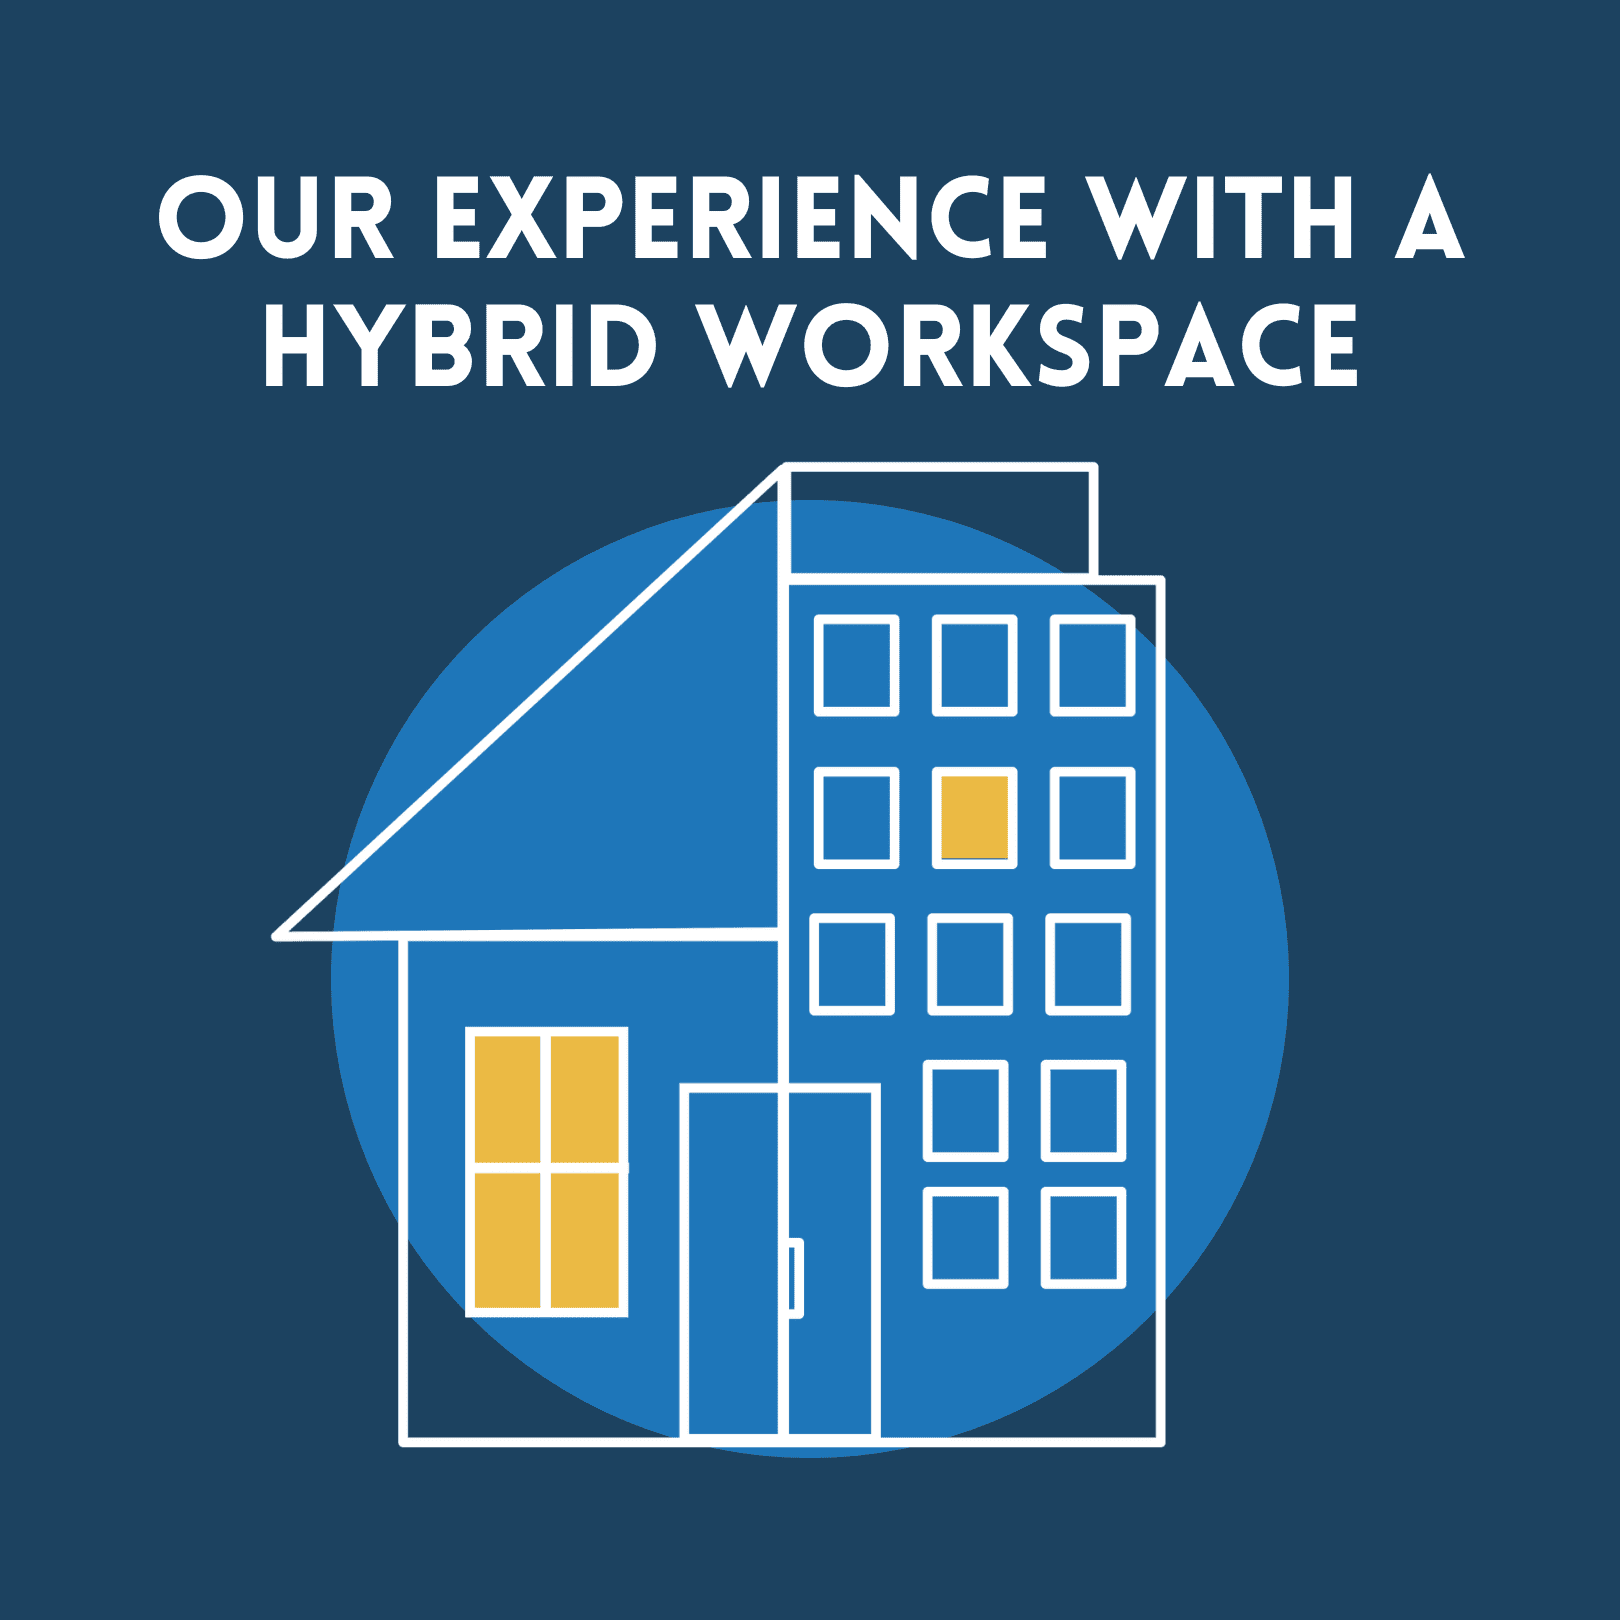 Our experience with a hybrid workspace